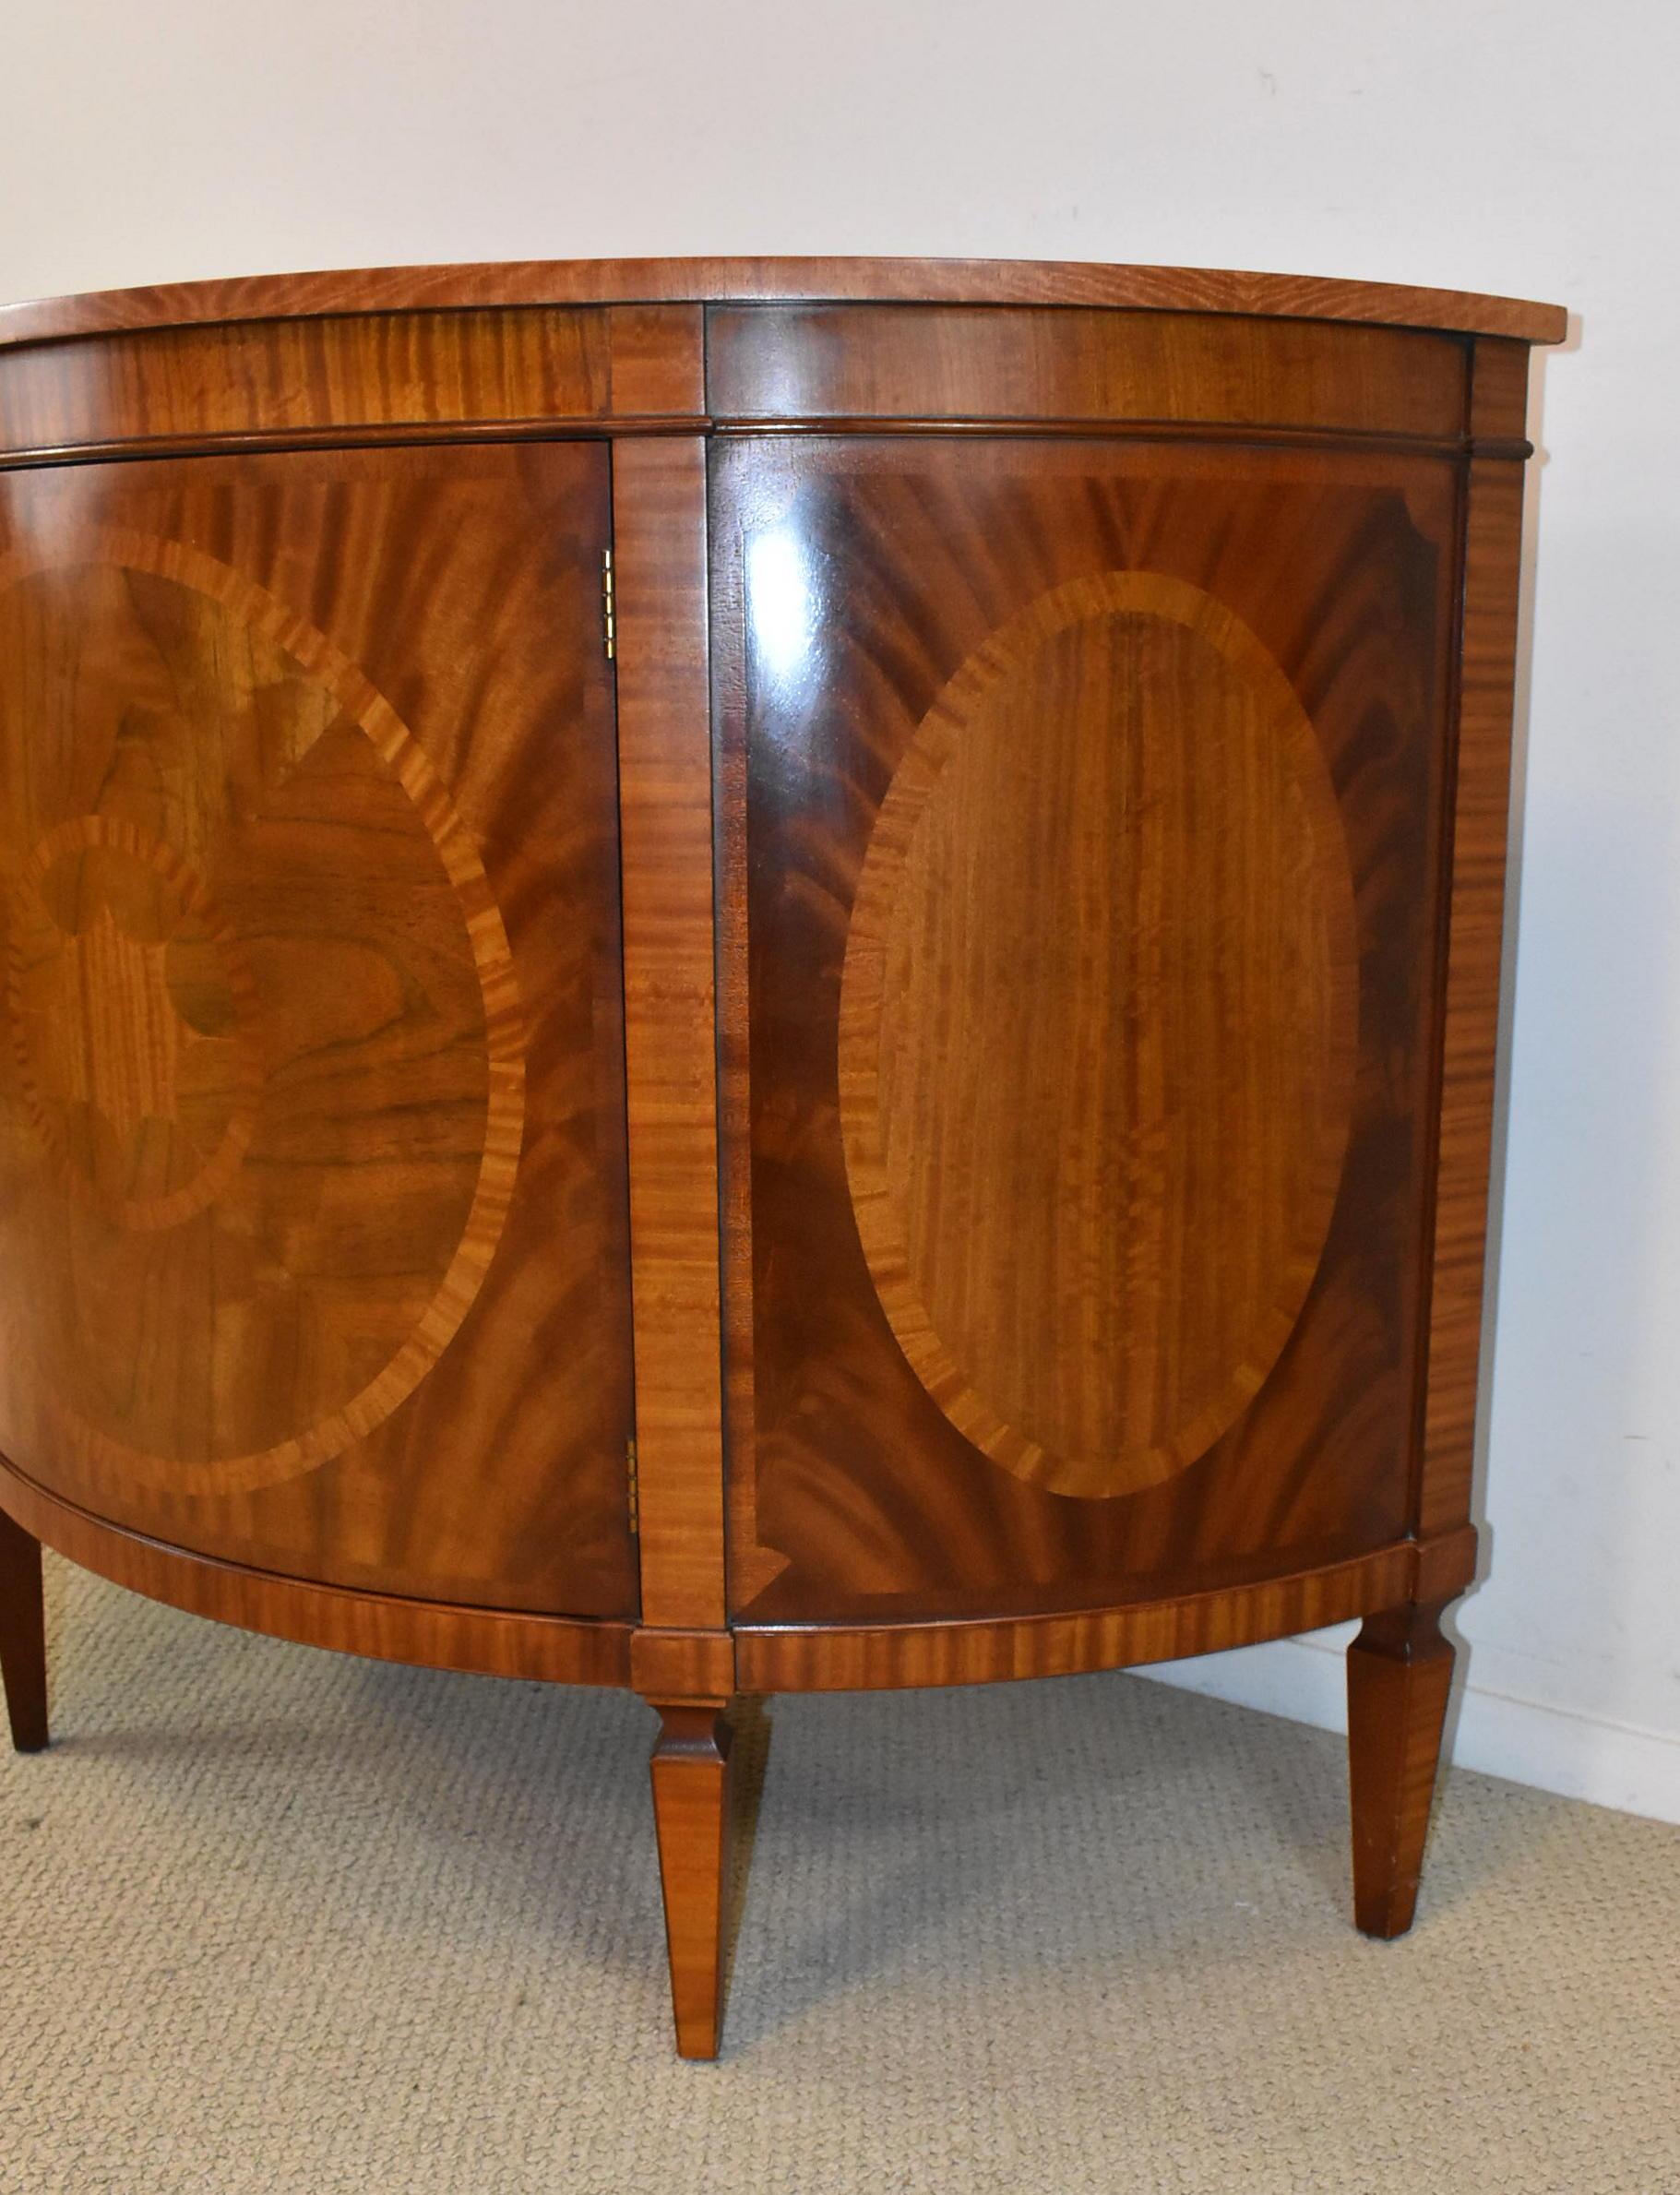 A beautiful flamed mahogany demilune by Baker Furniture as a part of their Fine Historic Charleston Collection. This piece is adorned with a mix of exotic wood inlays. The front is decorated with banded ovals surrounding a central starburst; the